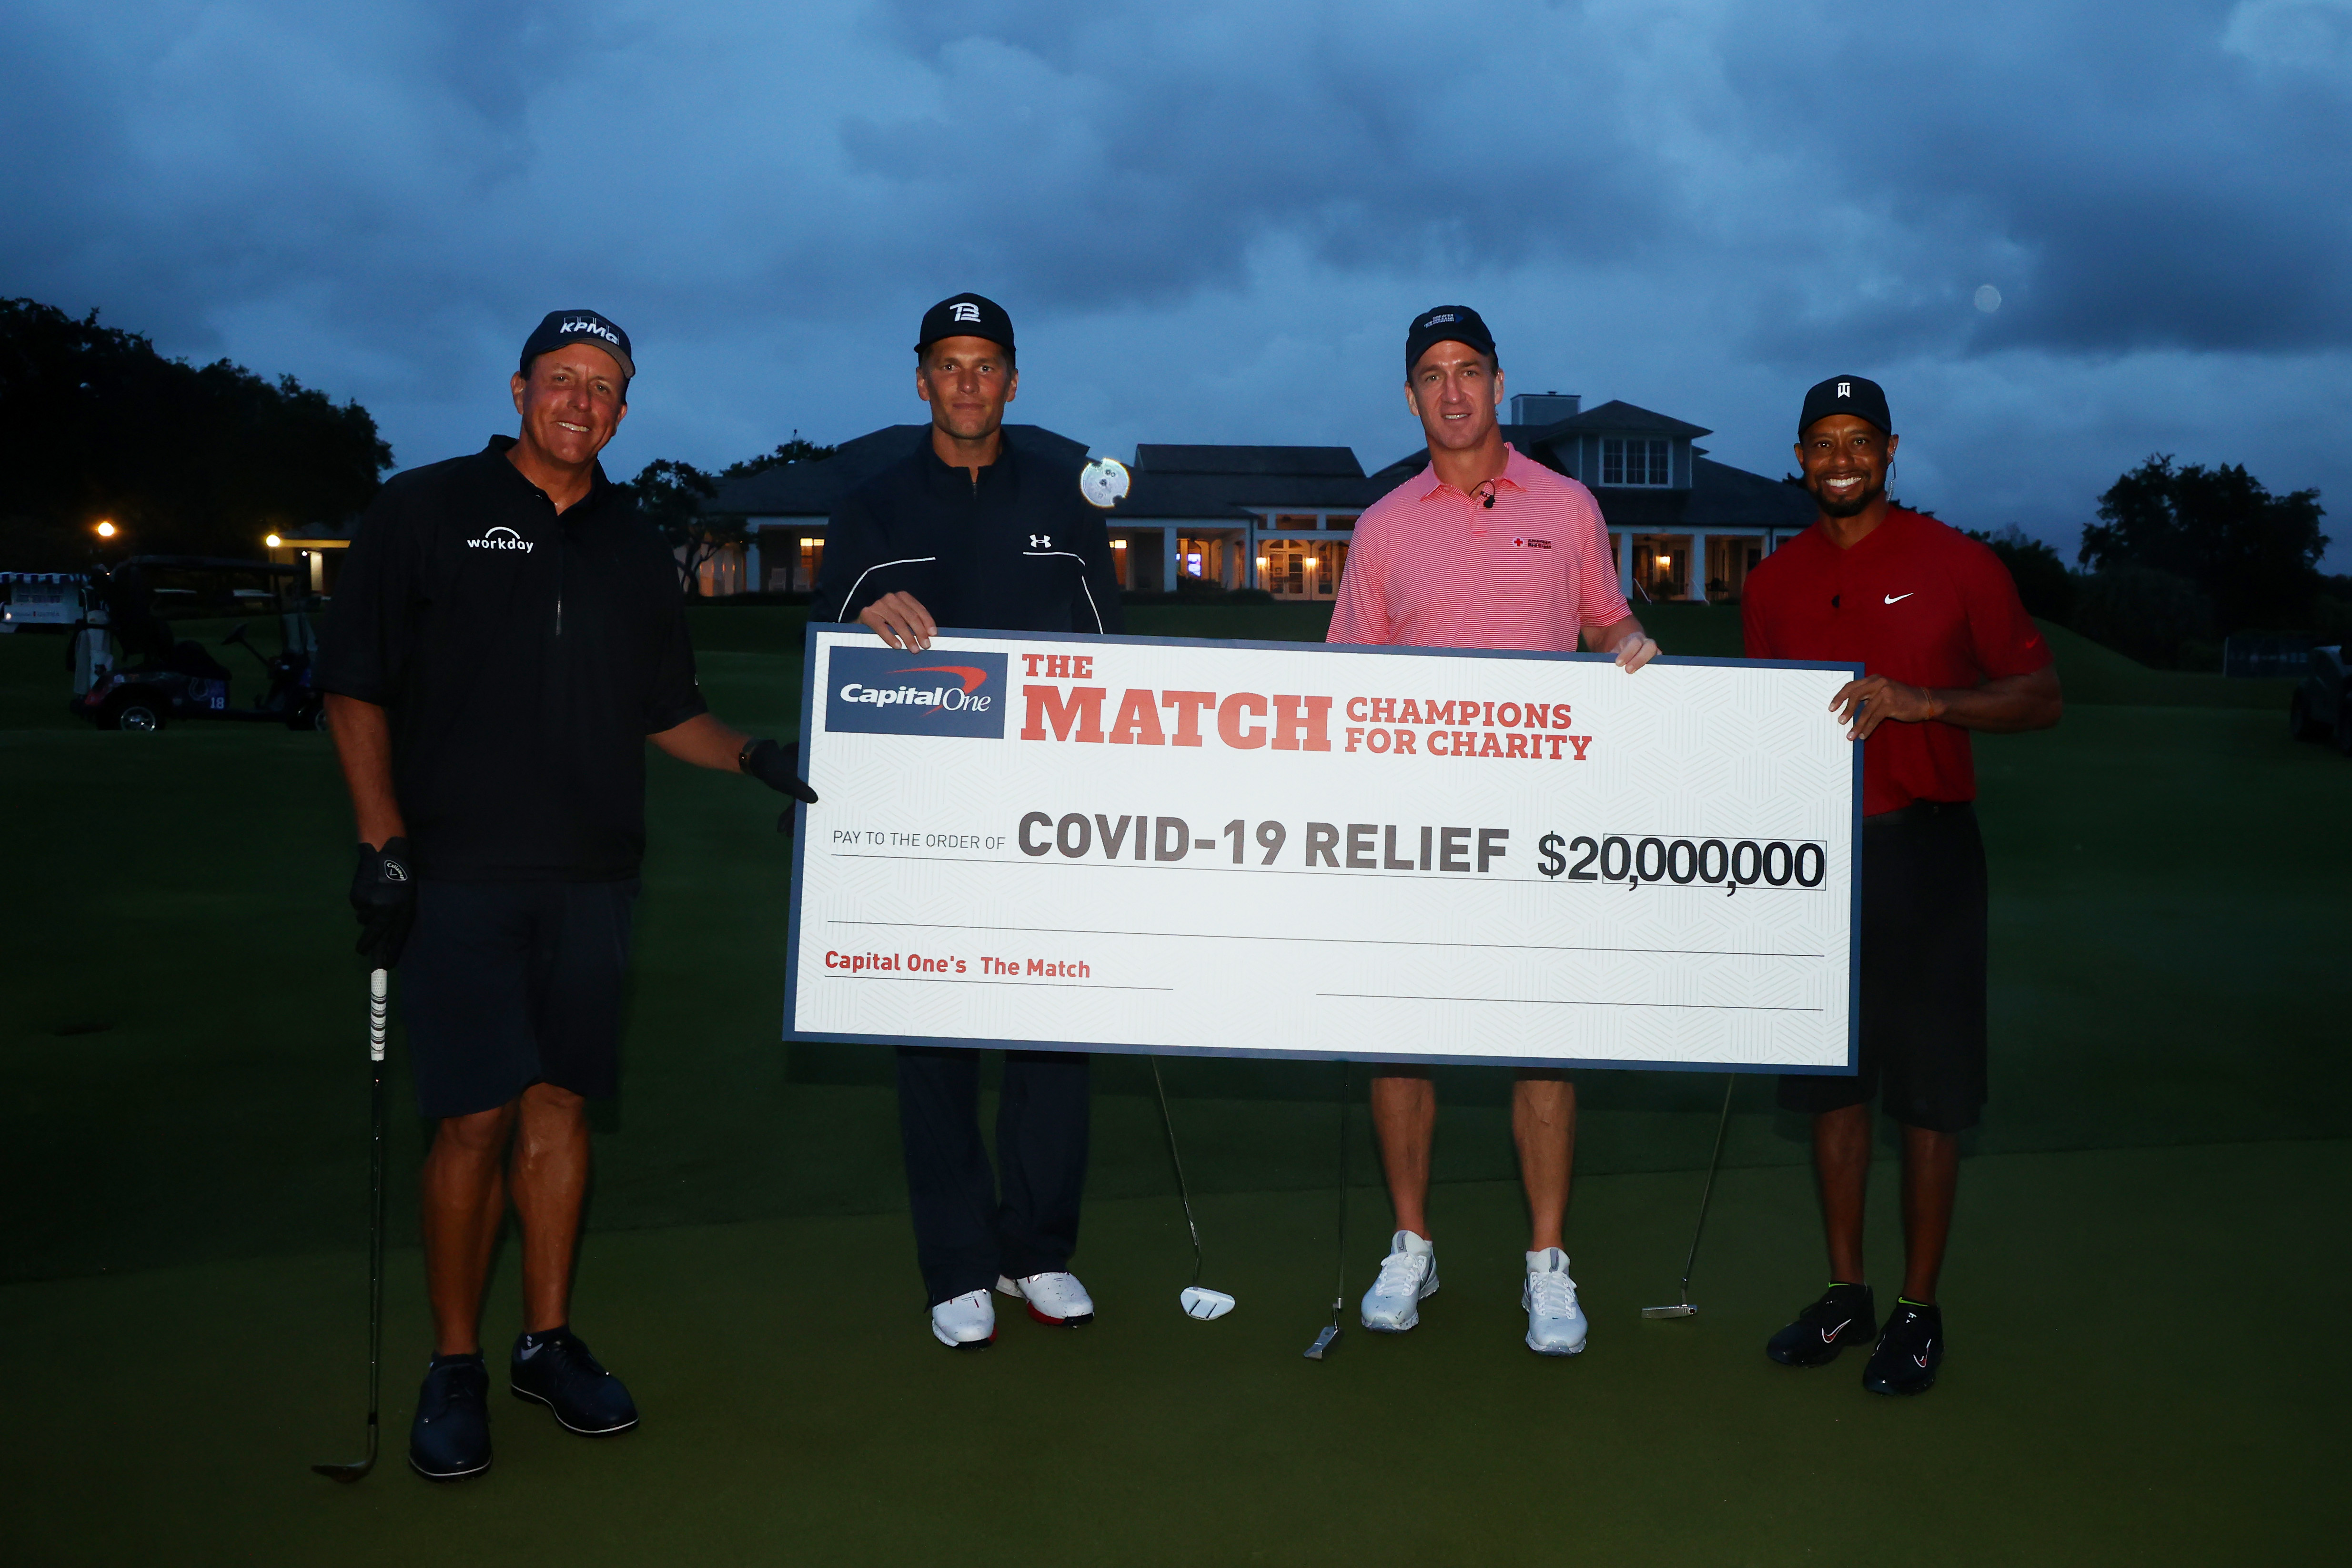 Tiger Woods And Peyton Manning Defeat Phil Mickelson And Tom Brady